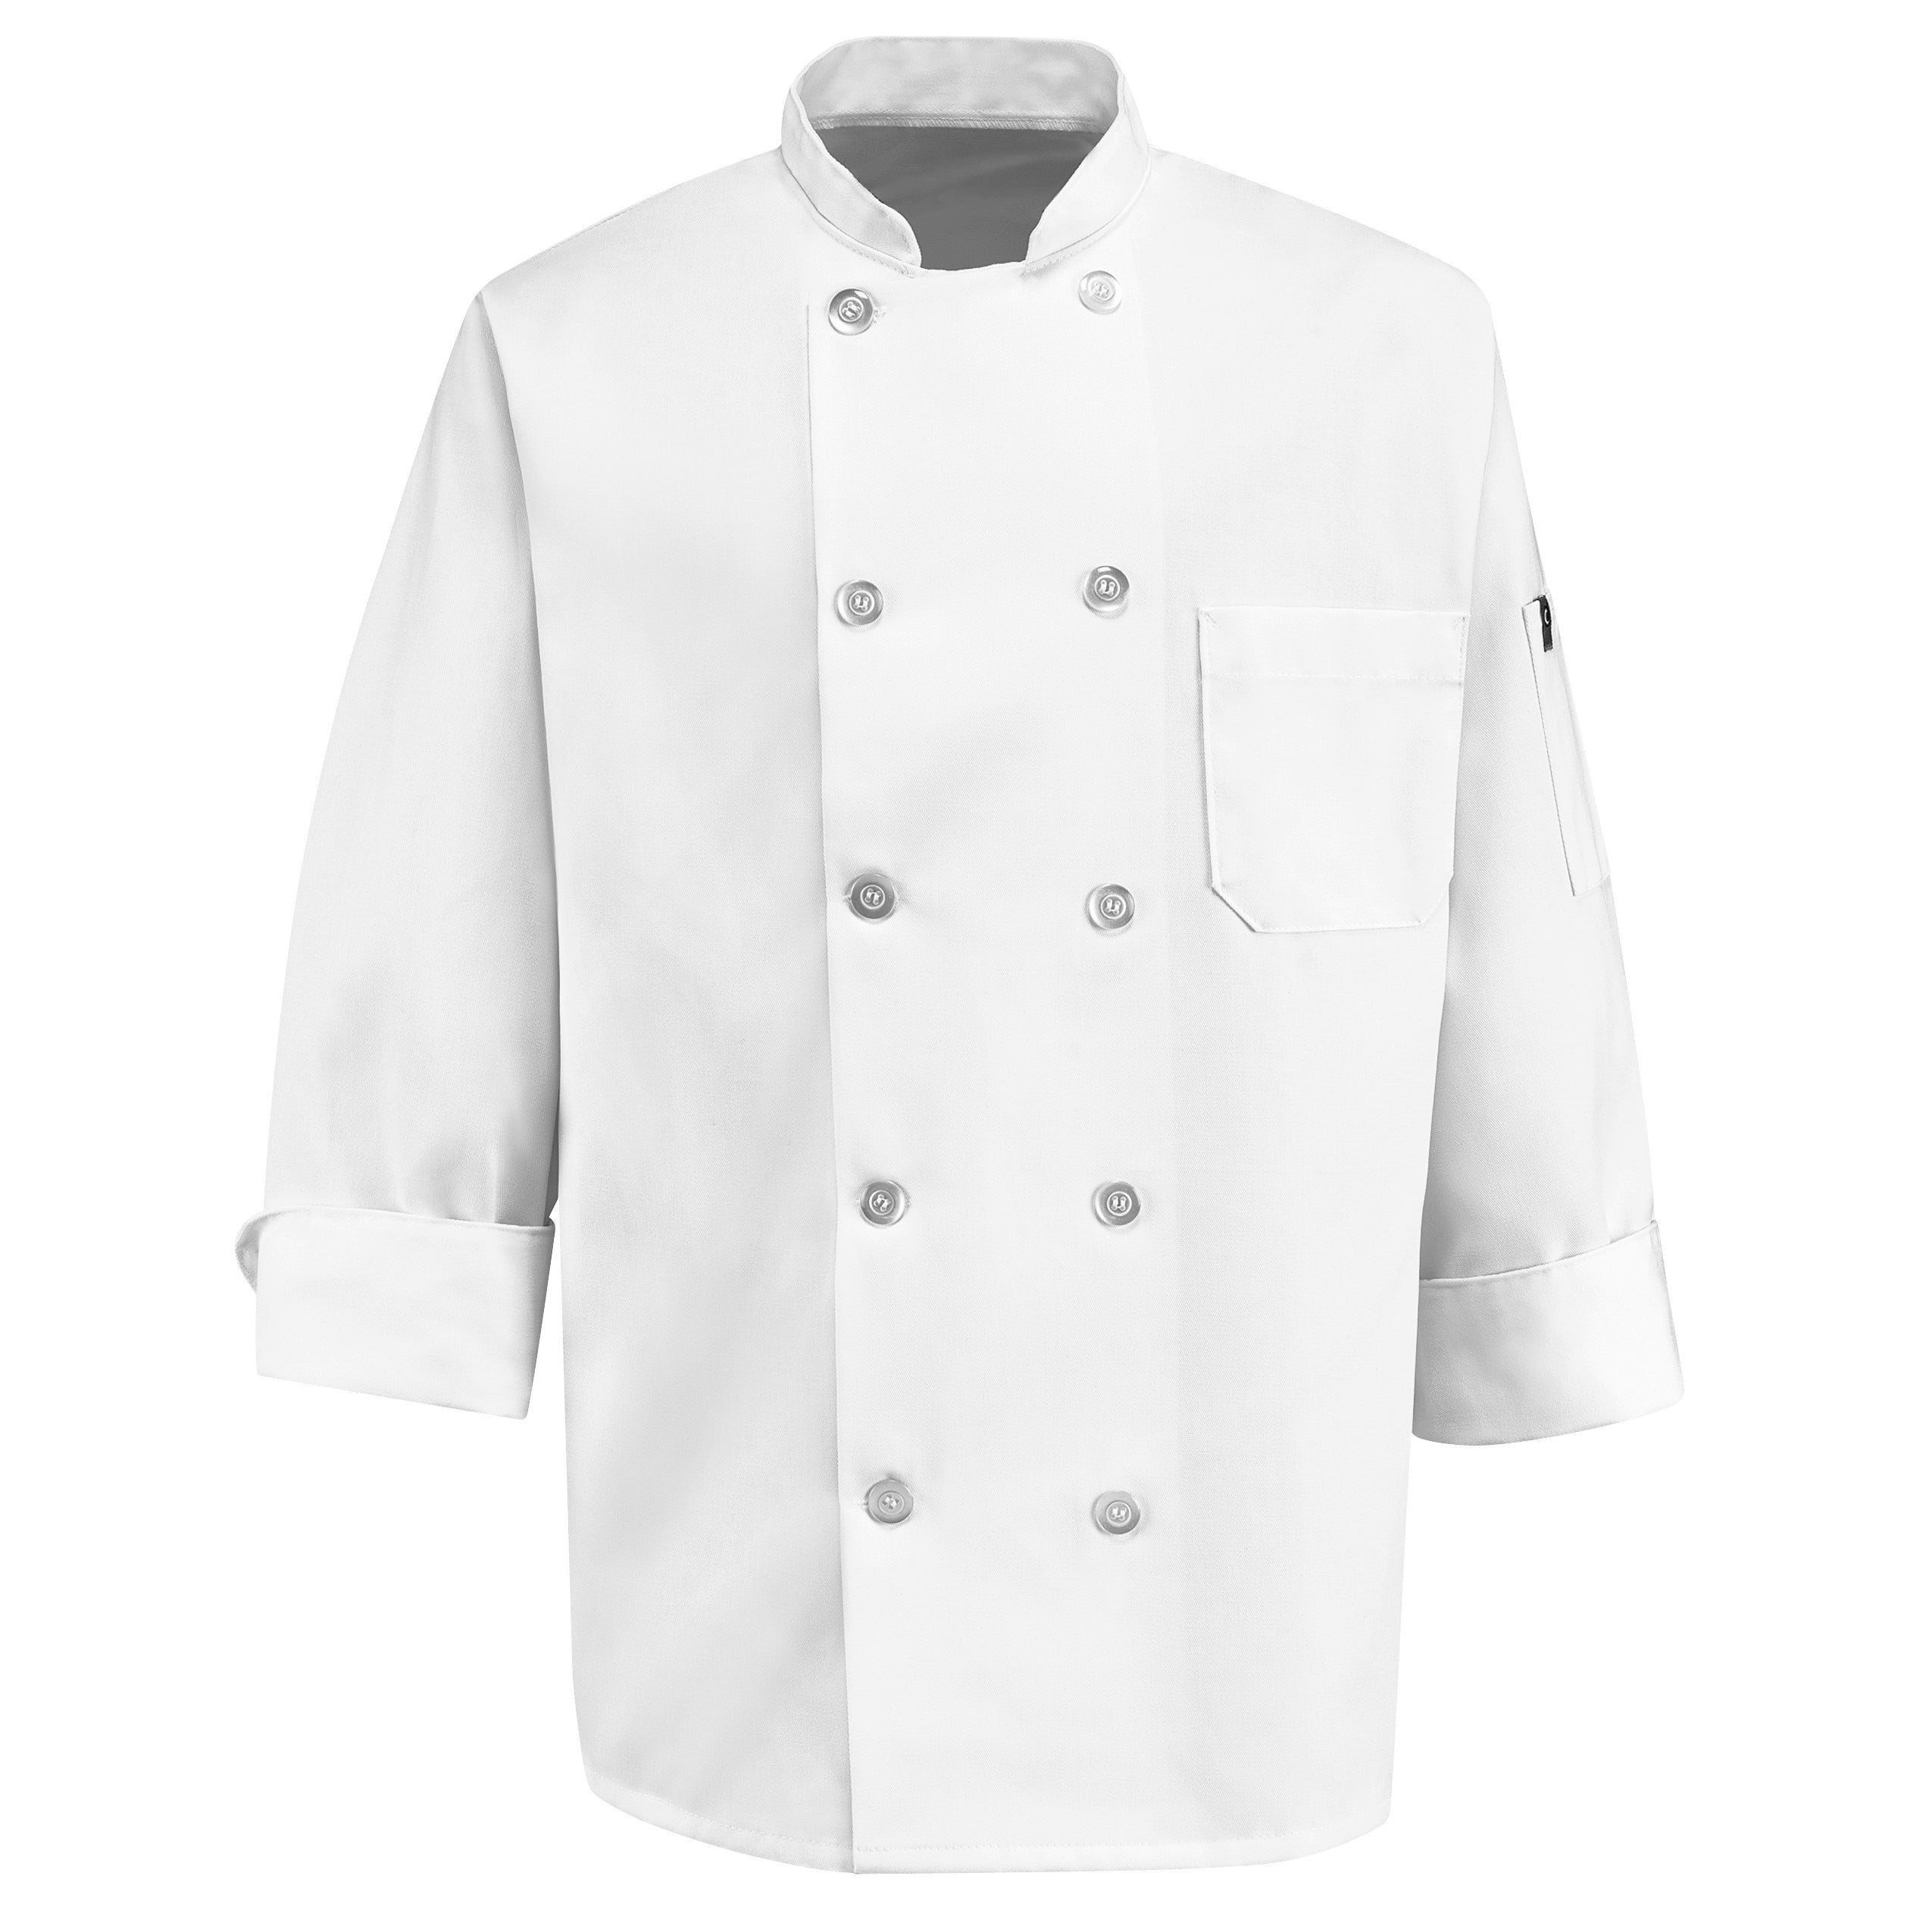 Ten Pearl Button Chef Coat 0415 - White-eSafety Supplies, Inc